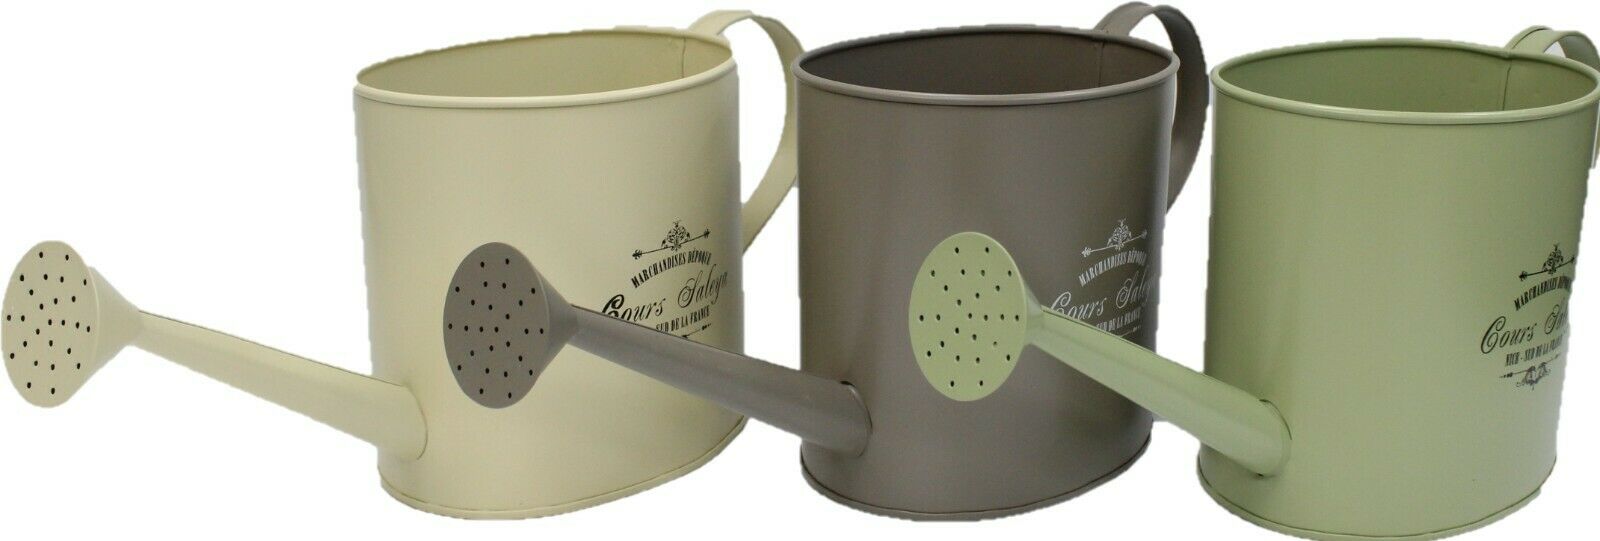 Pastel Colour Metal Watering Can 3 Litre Retro Home Decor Watering Can Planter